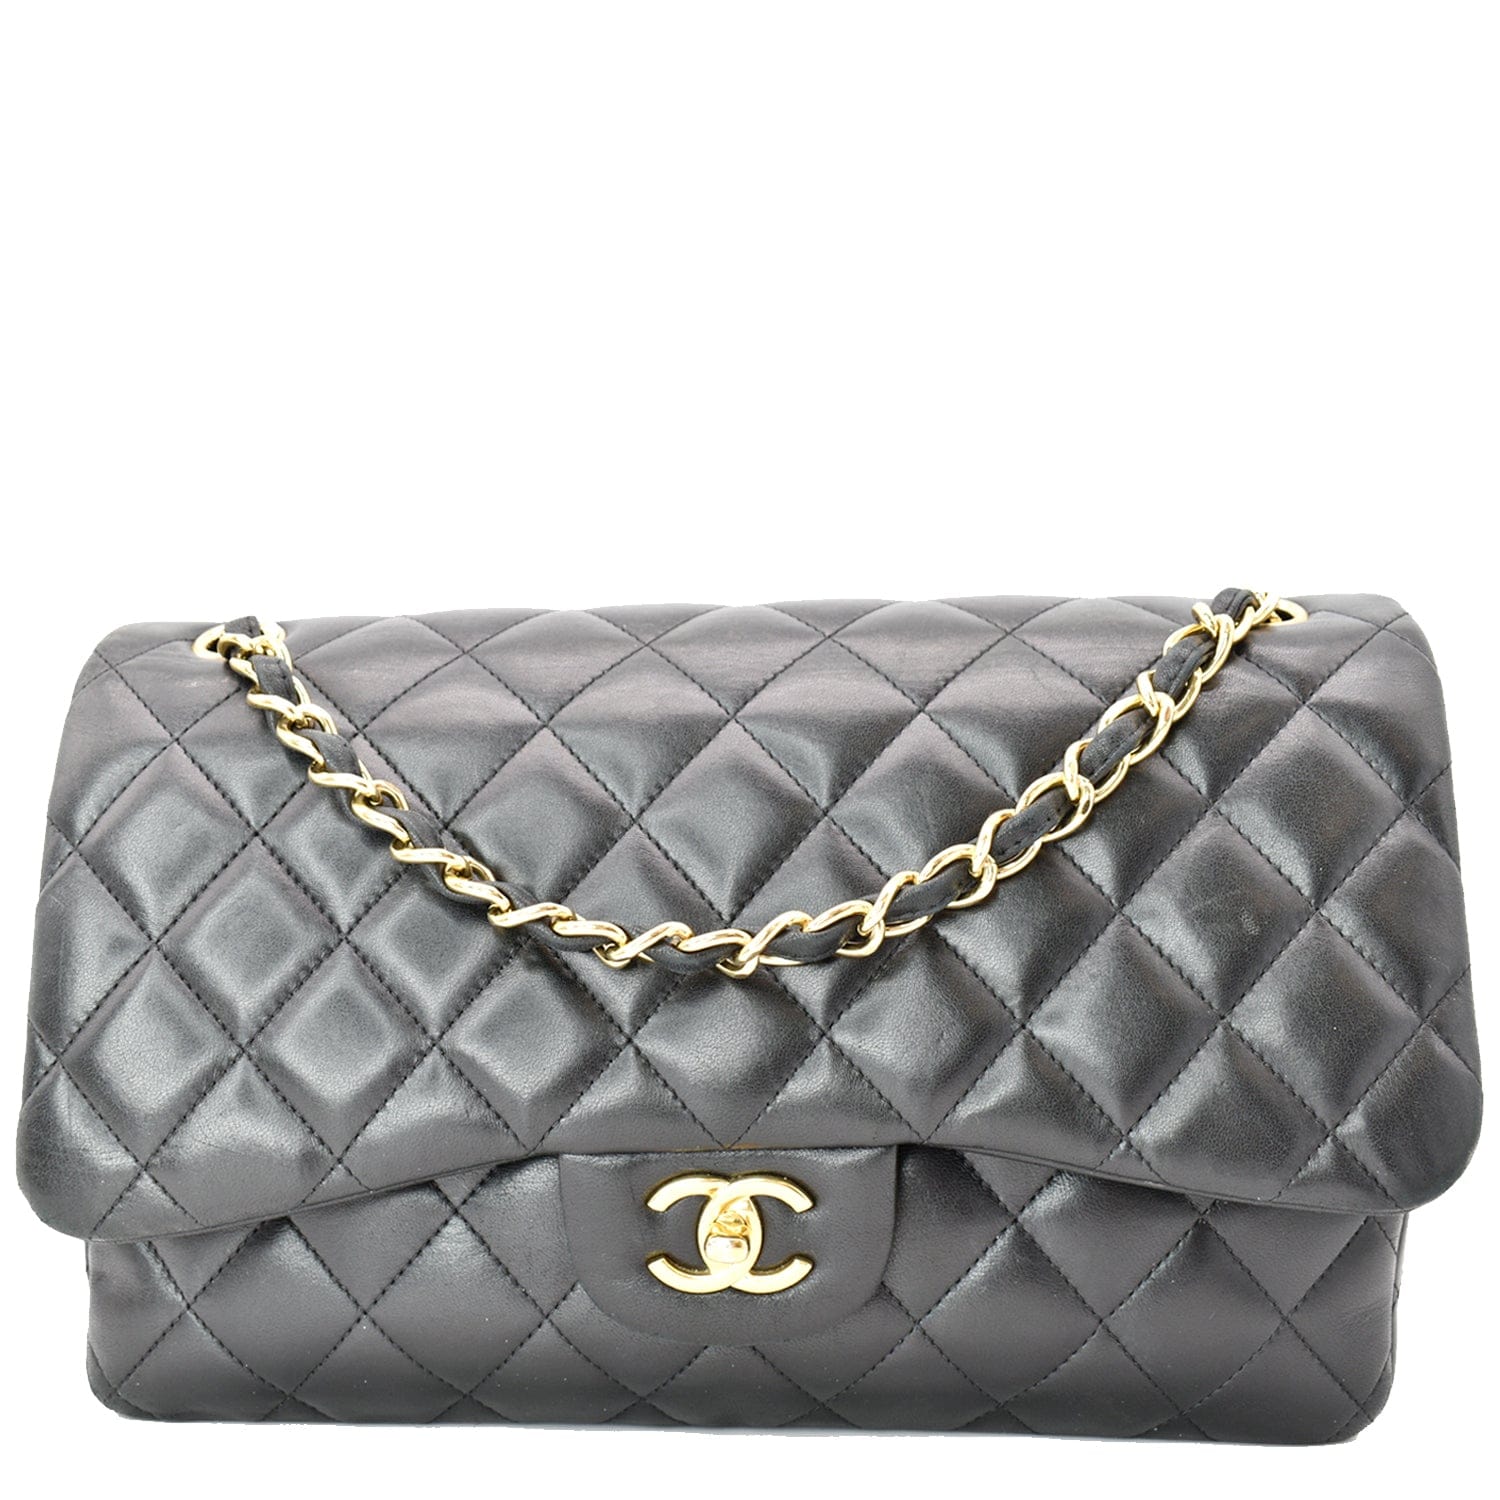 CHANEL, Bags, Chanel Lets Lemon Straight Tote 5x5 With Whistle